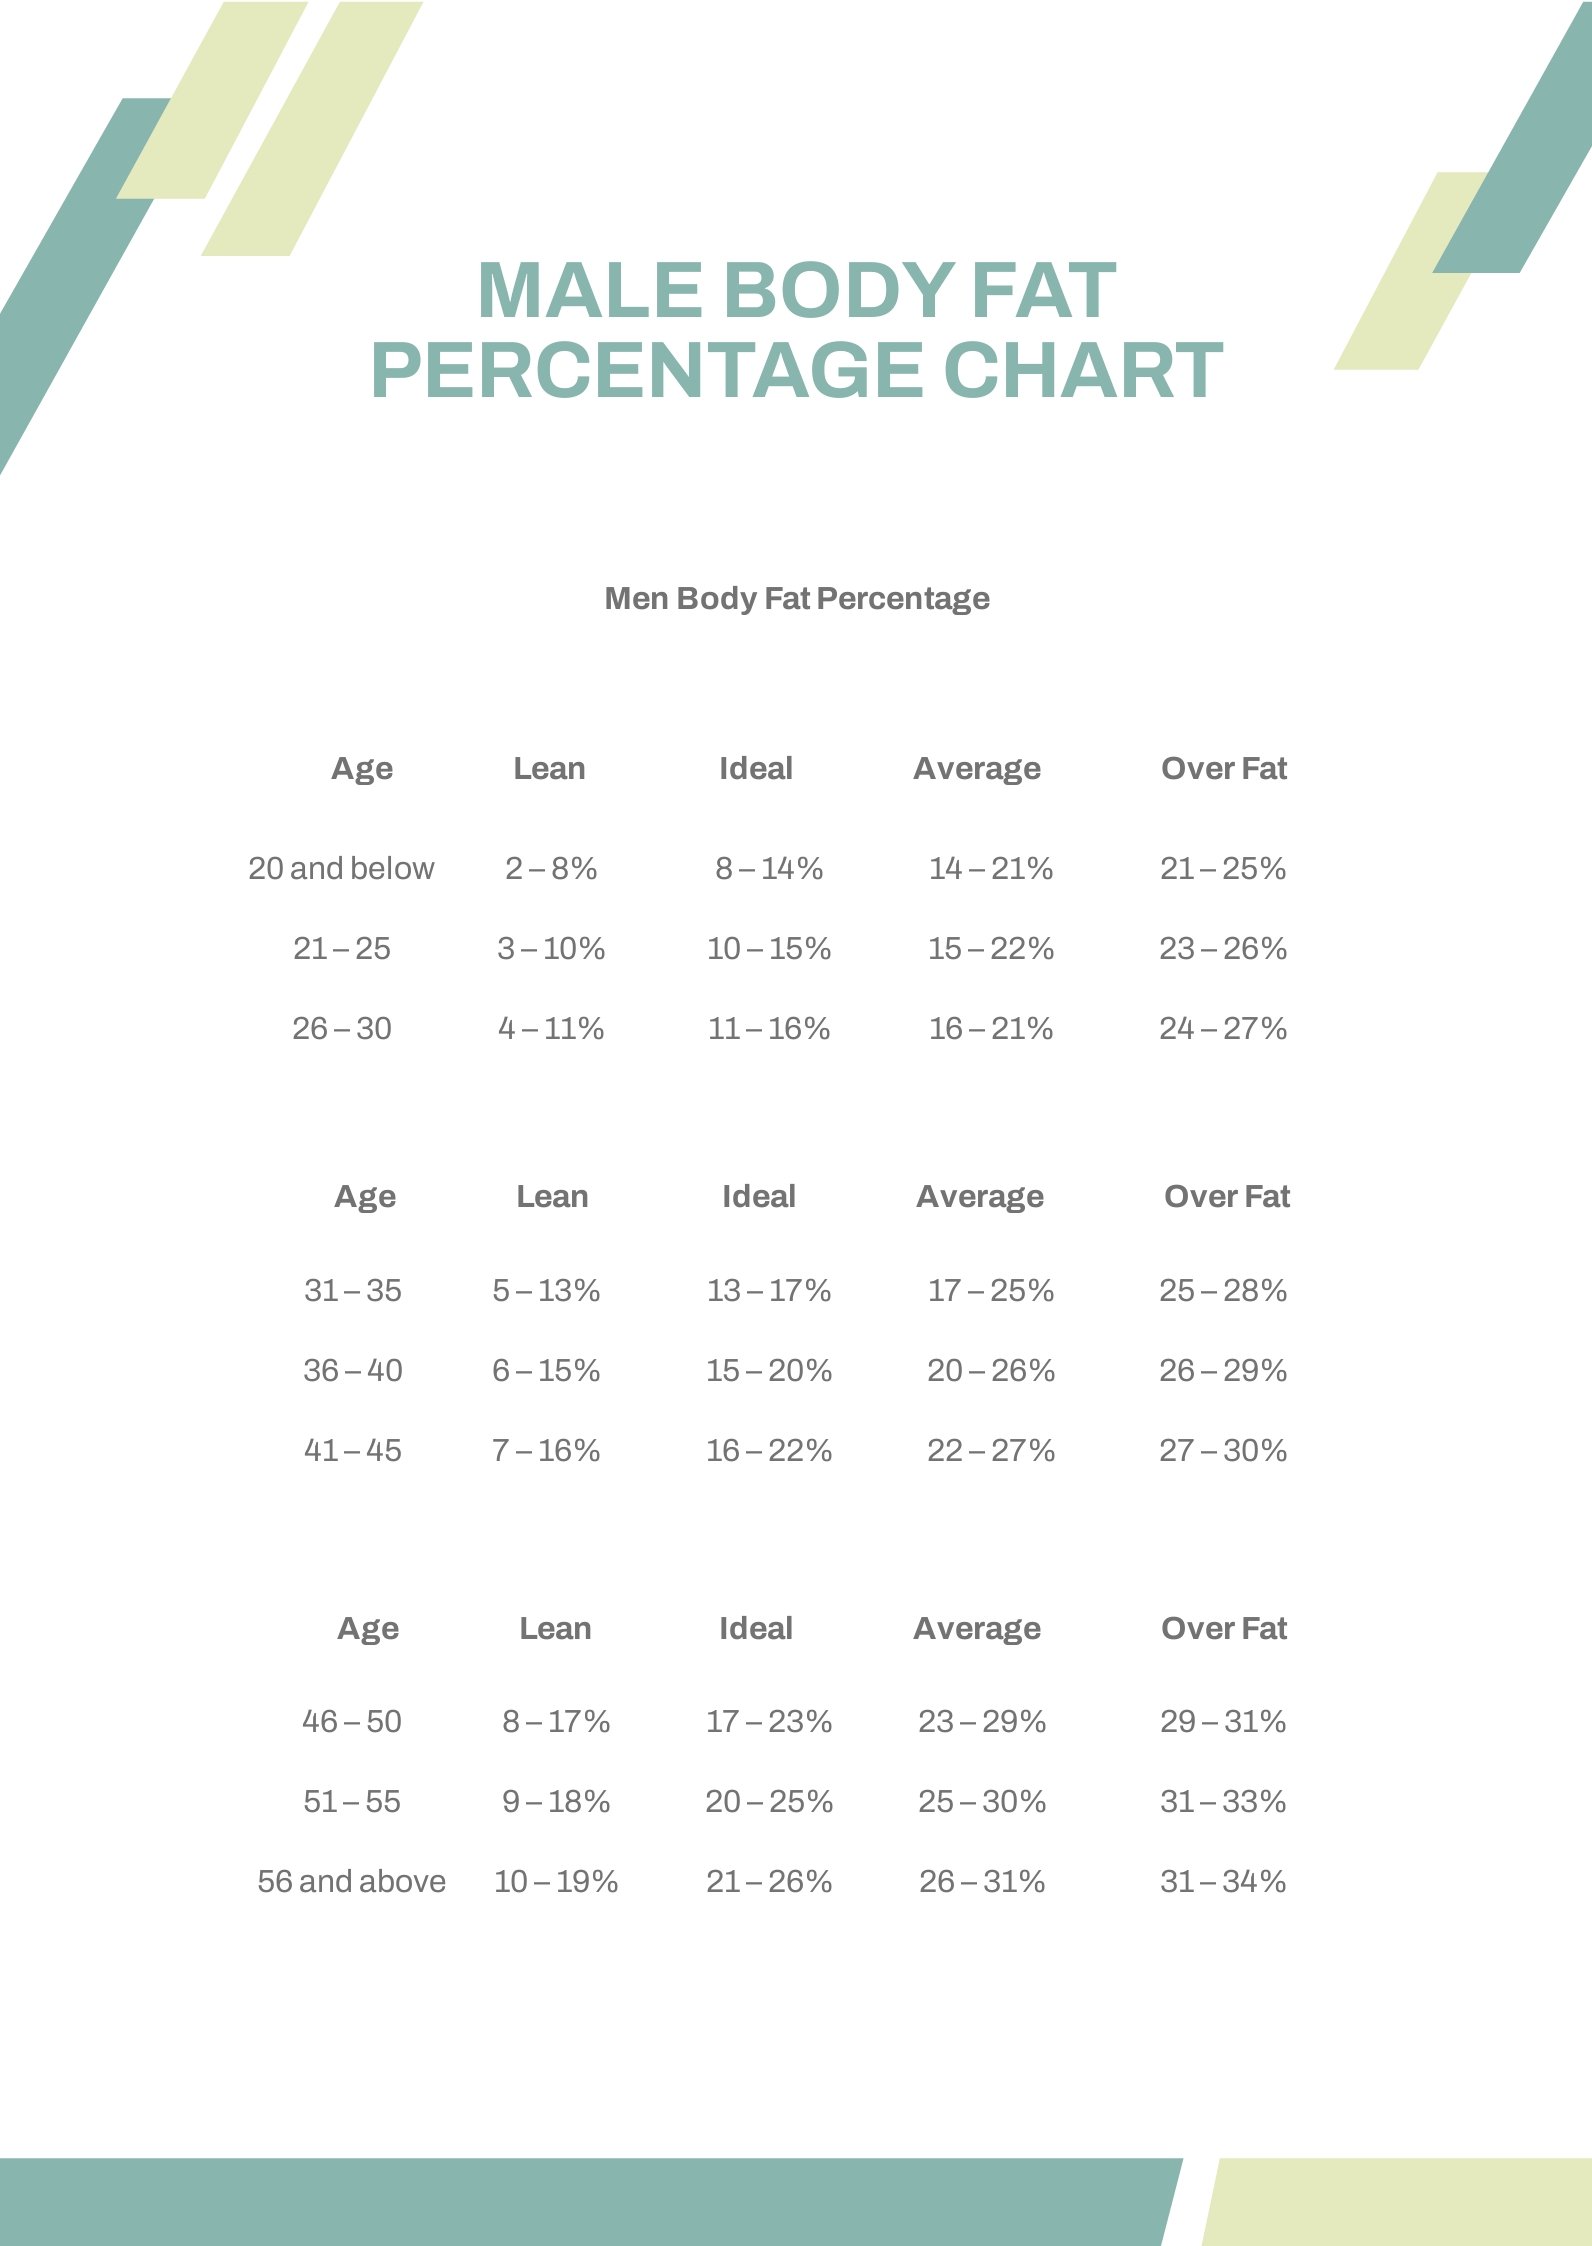 Male Army Body Fat Percentage Chart in PDF - Download | Template.net